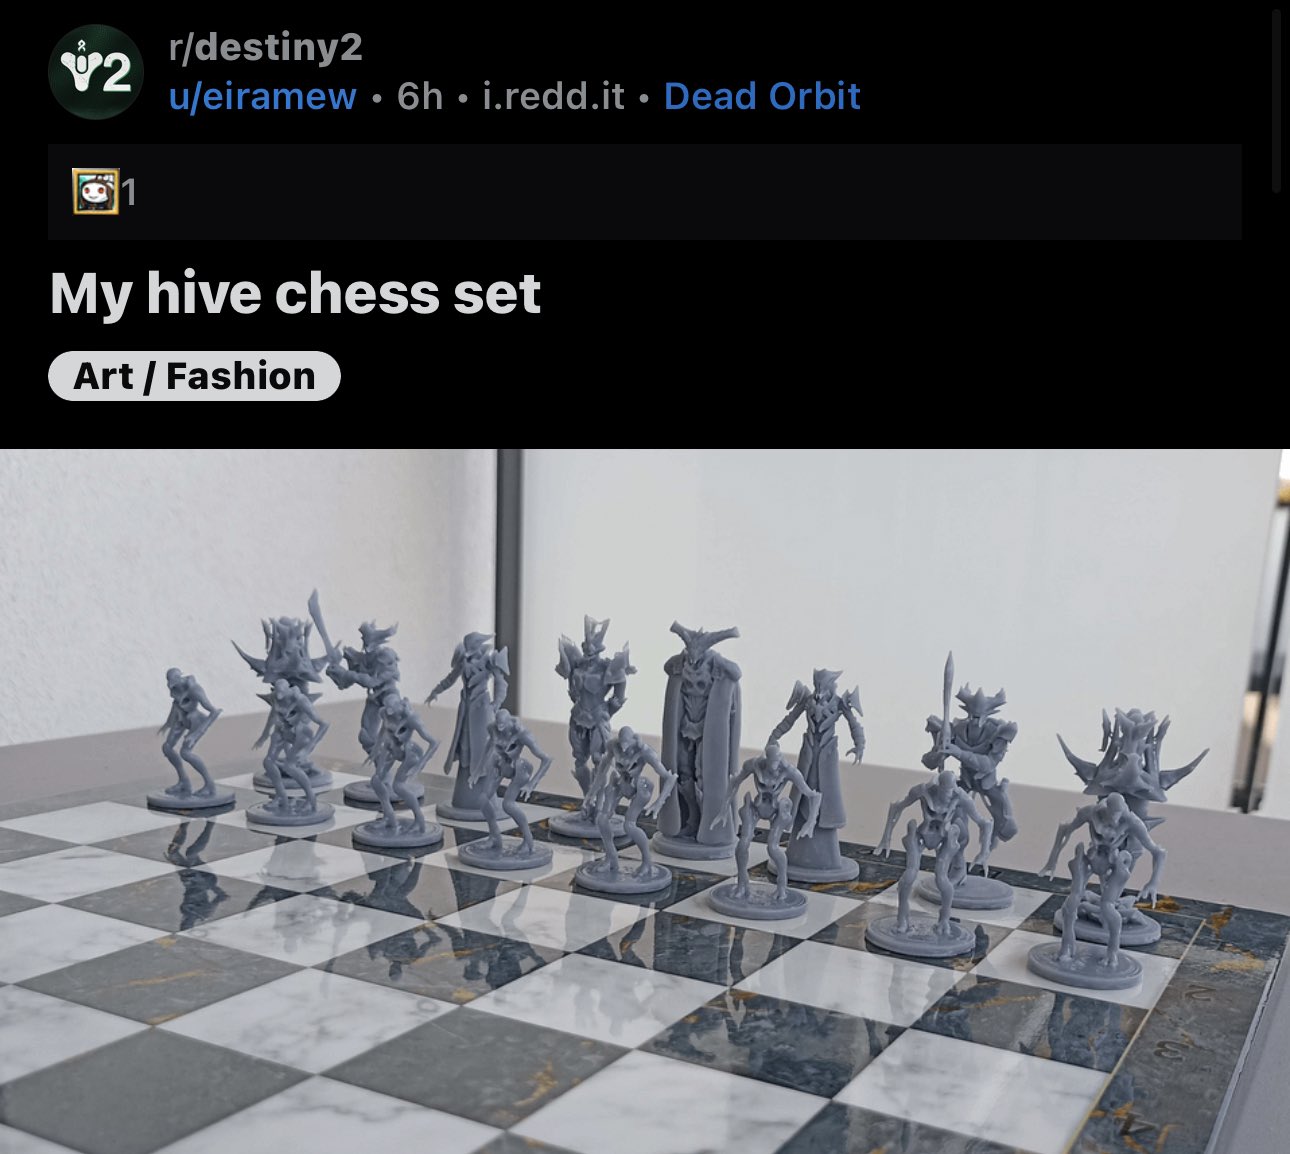 Destiny 2 players playing chess for the first time : r/destiny2